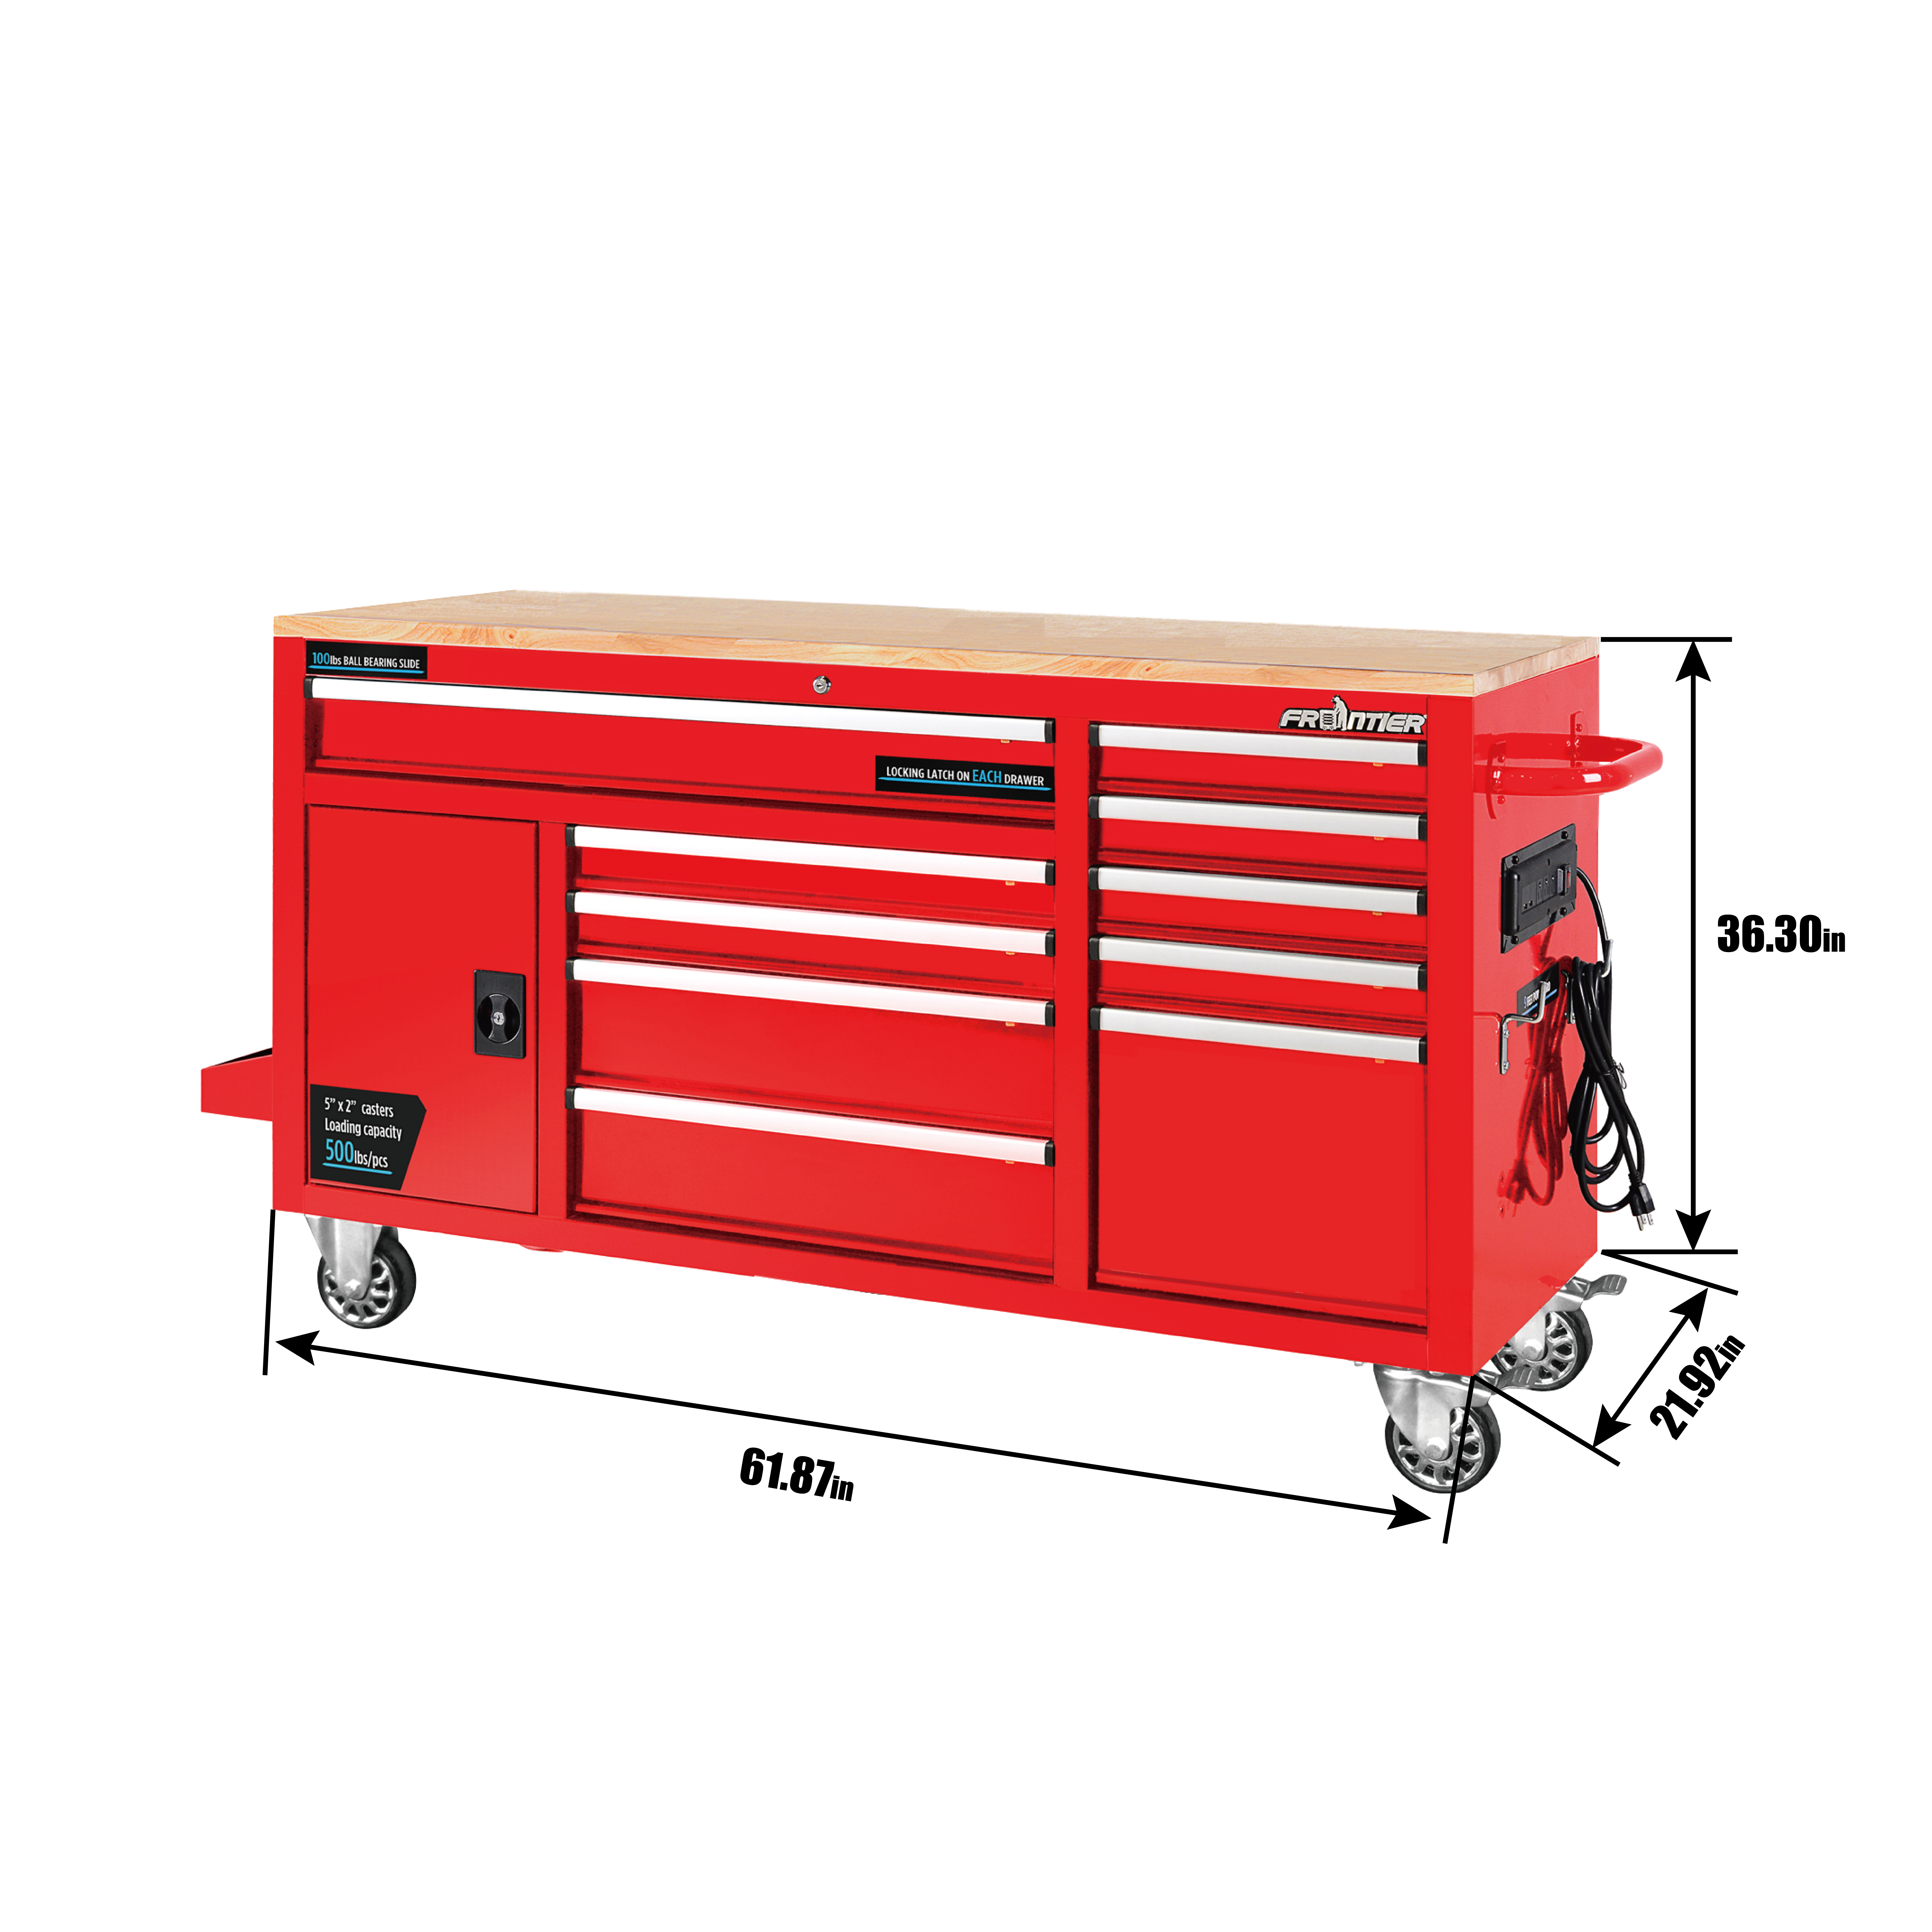 FRONTIER 62-inch W x 37-inch H x 22-inch D, Heavy Duty Mobile tool chest, tool cabinet with 10 drawers in Red - image 2 of 4